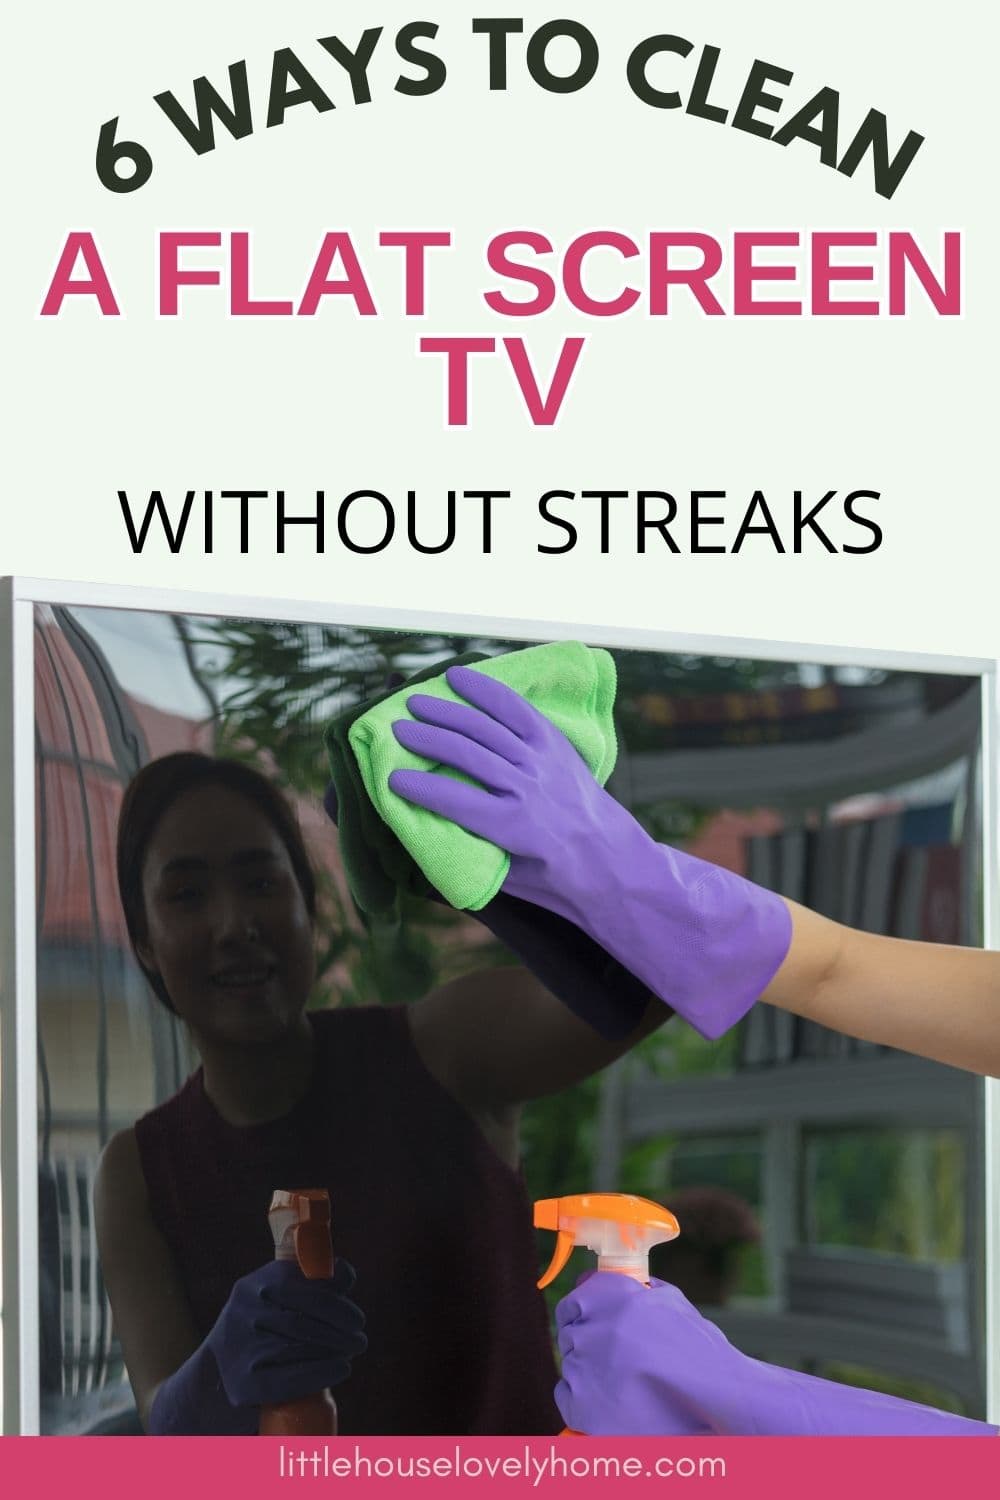 Ways to Clean a Flat Screen TV